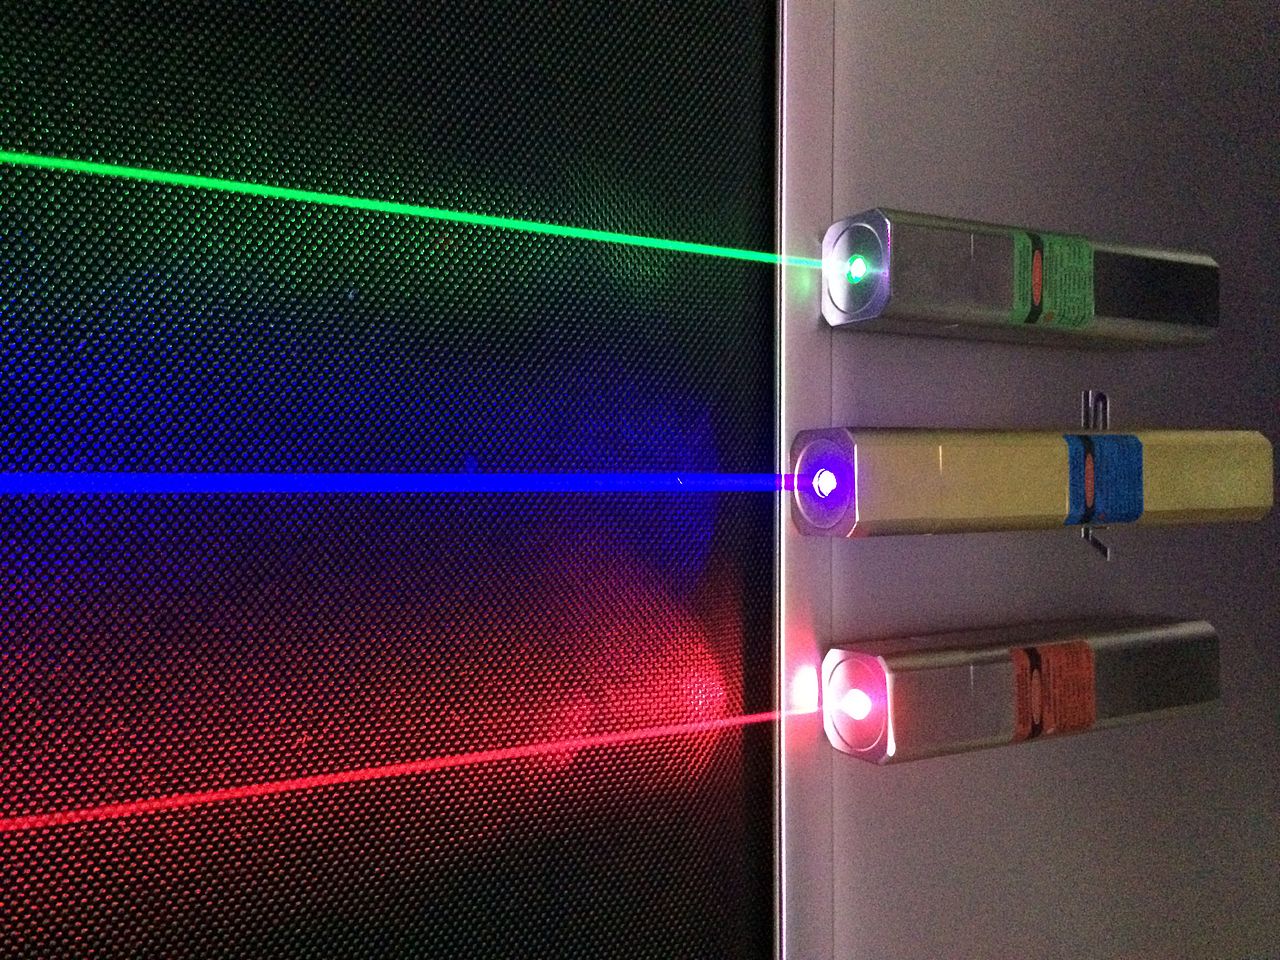 Scientists Are Adding ‘Star Wars’ Sound Effects To Real Lasers So They Can Hear Them